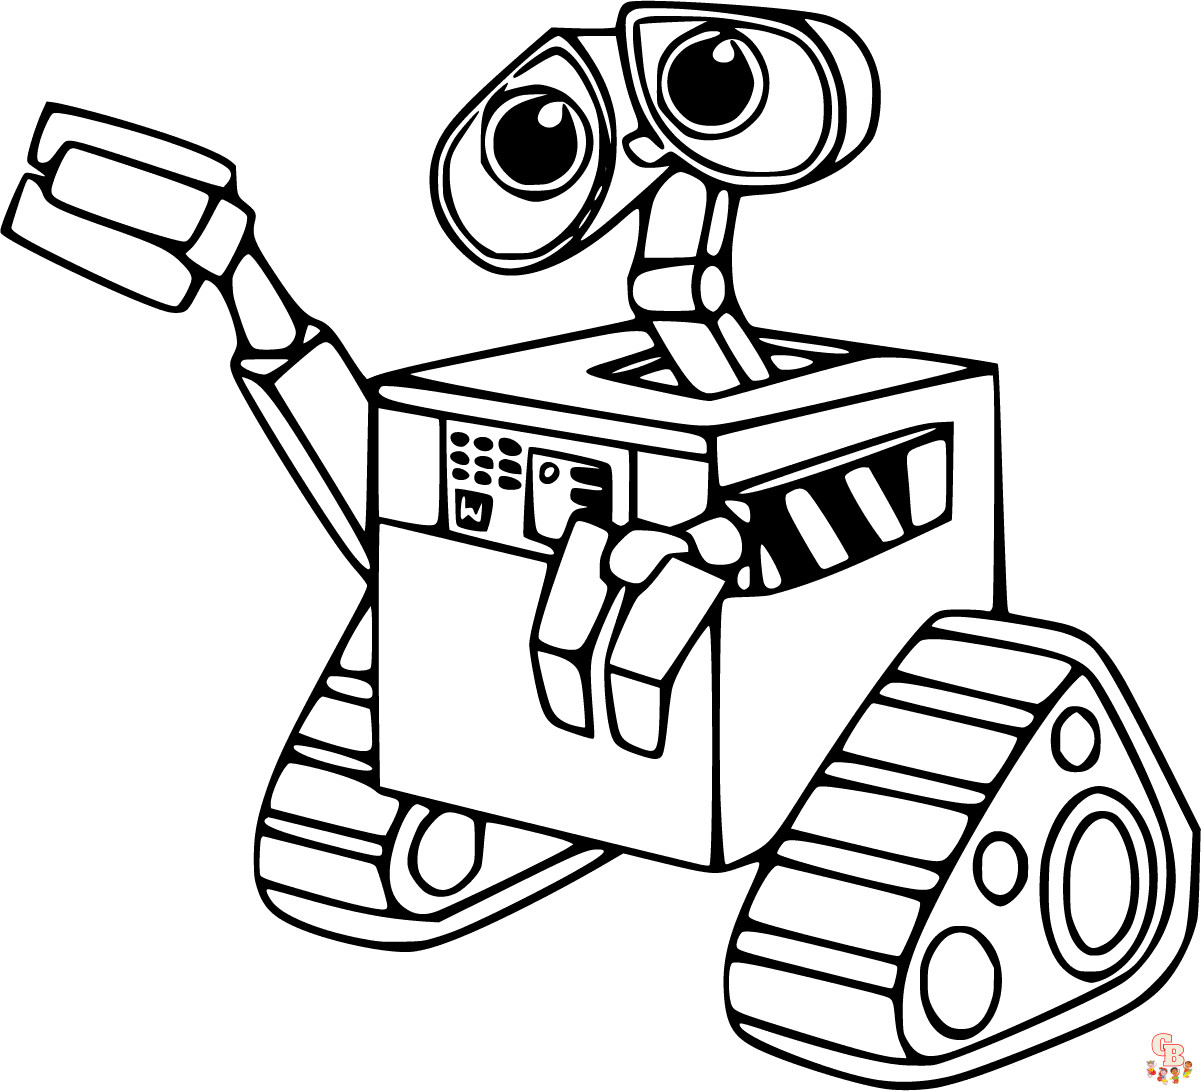 Wall E coloring pages printable